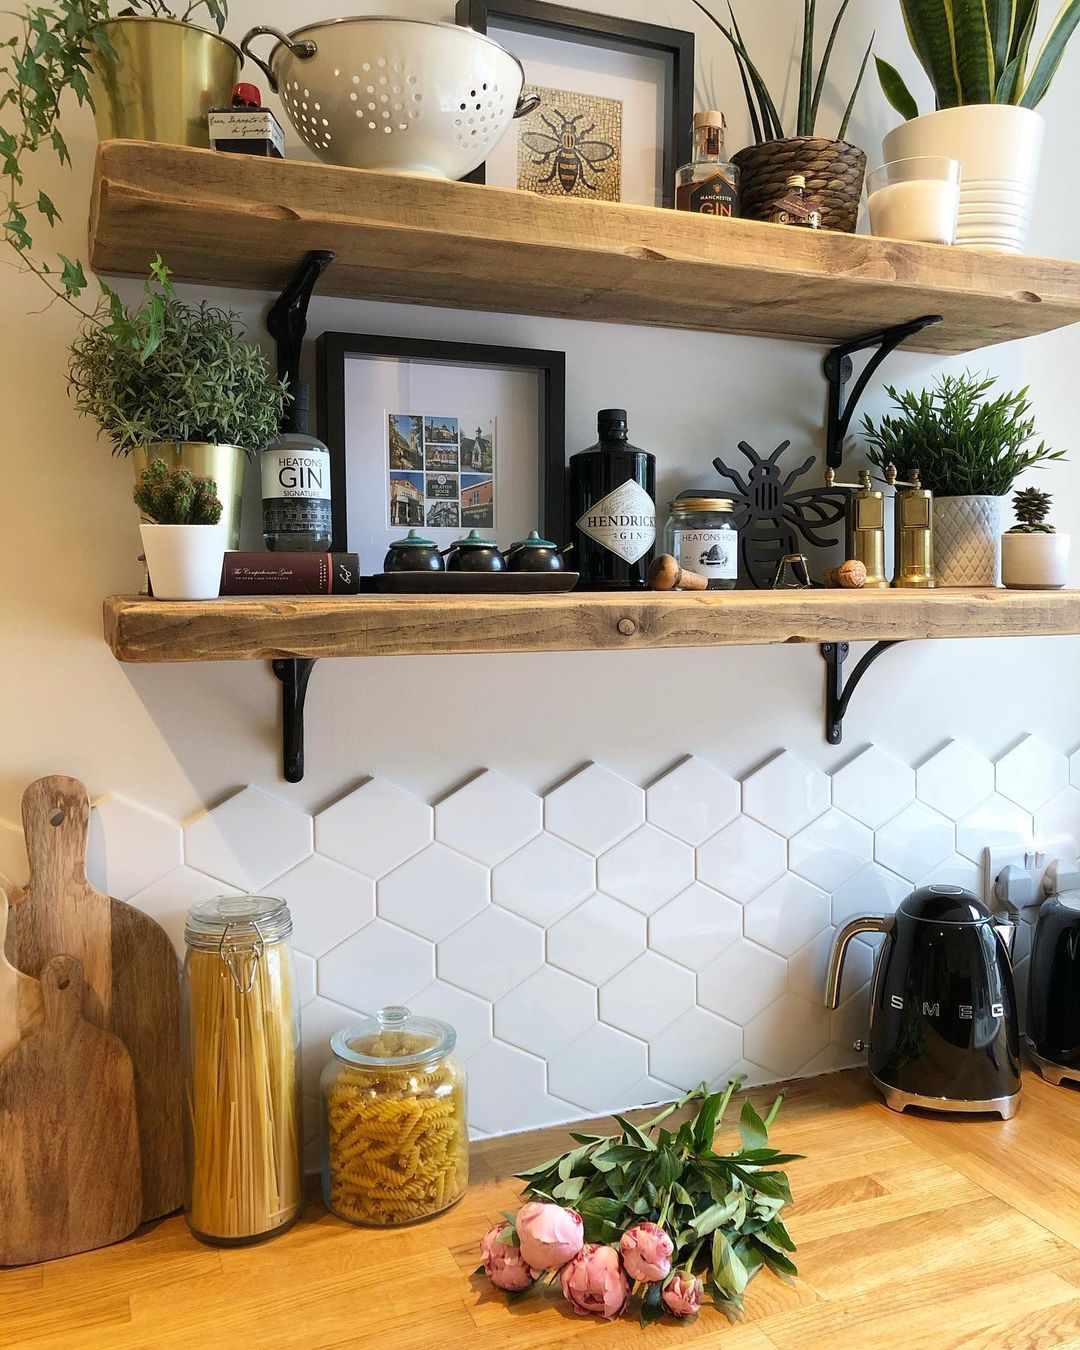 Kitchen Wall with Reclaimed Wood Floating Shelves. Photo by Instagram user @beatriceterrace1903